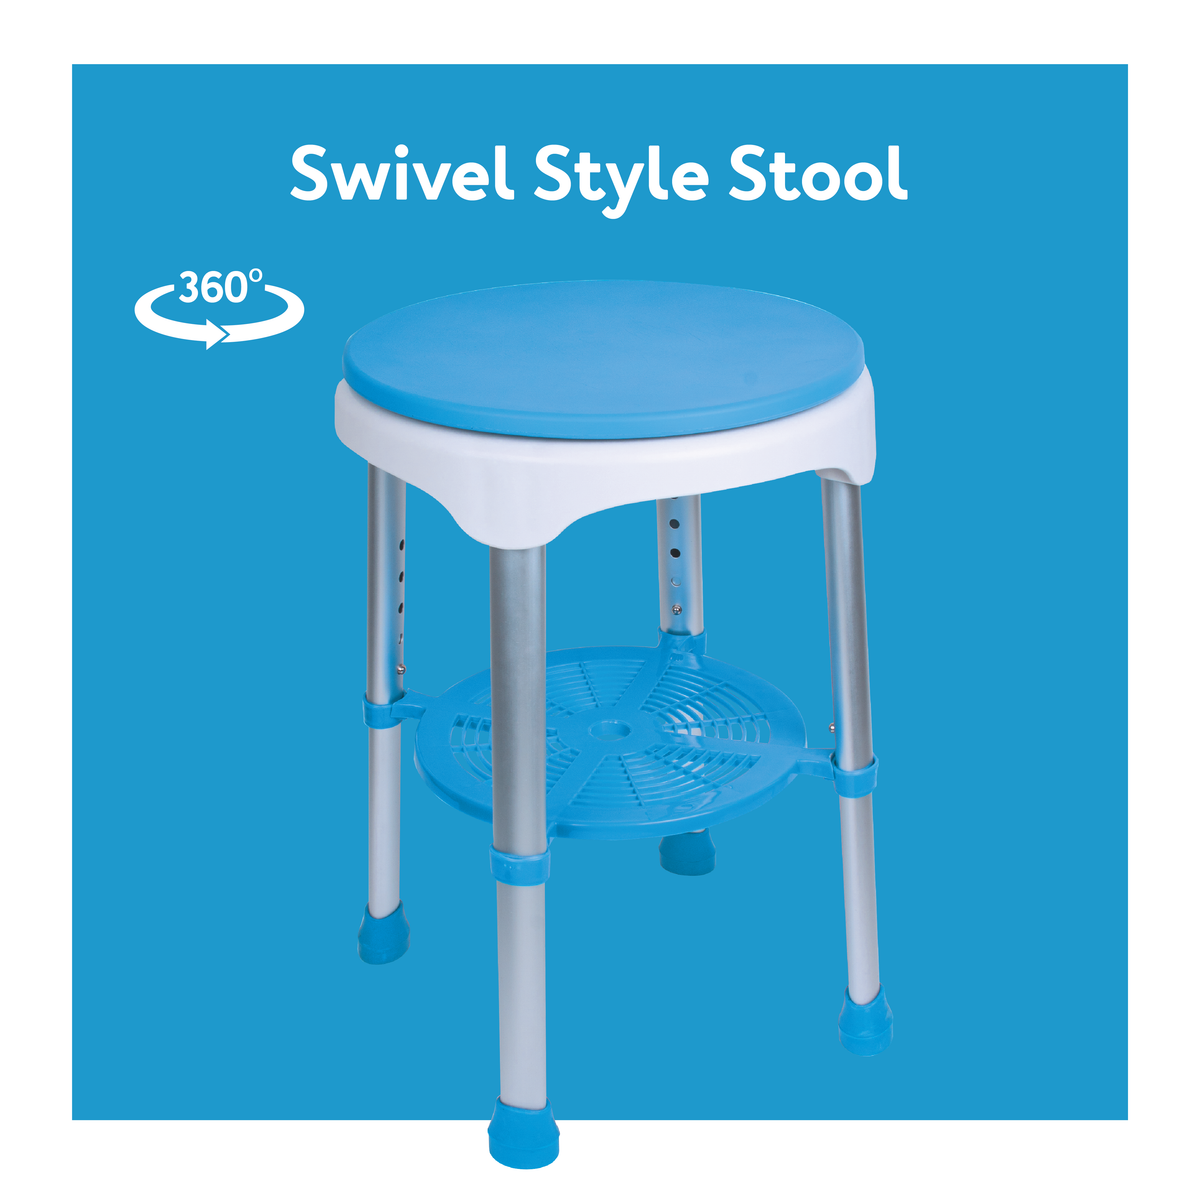 A shower stool with a 360 degree icon next to its seat. Text, “Swivel style stool”